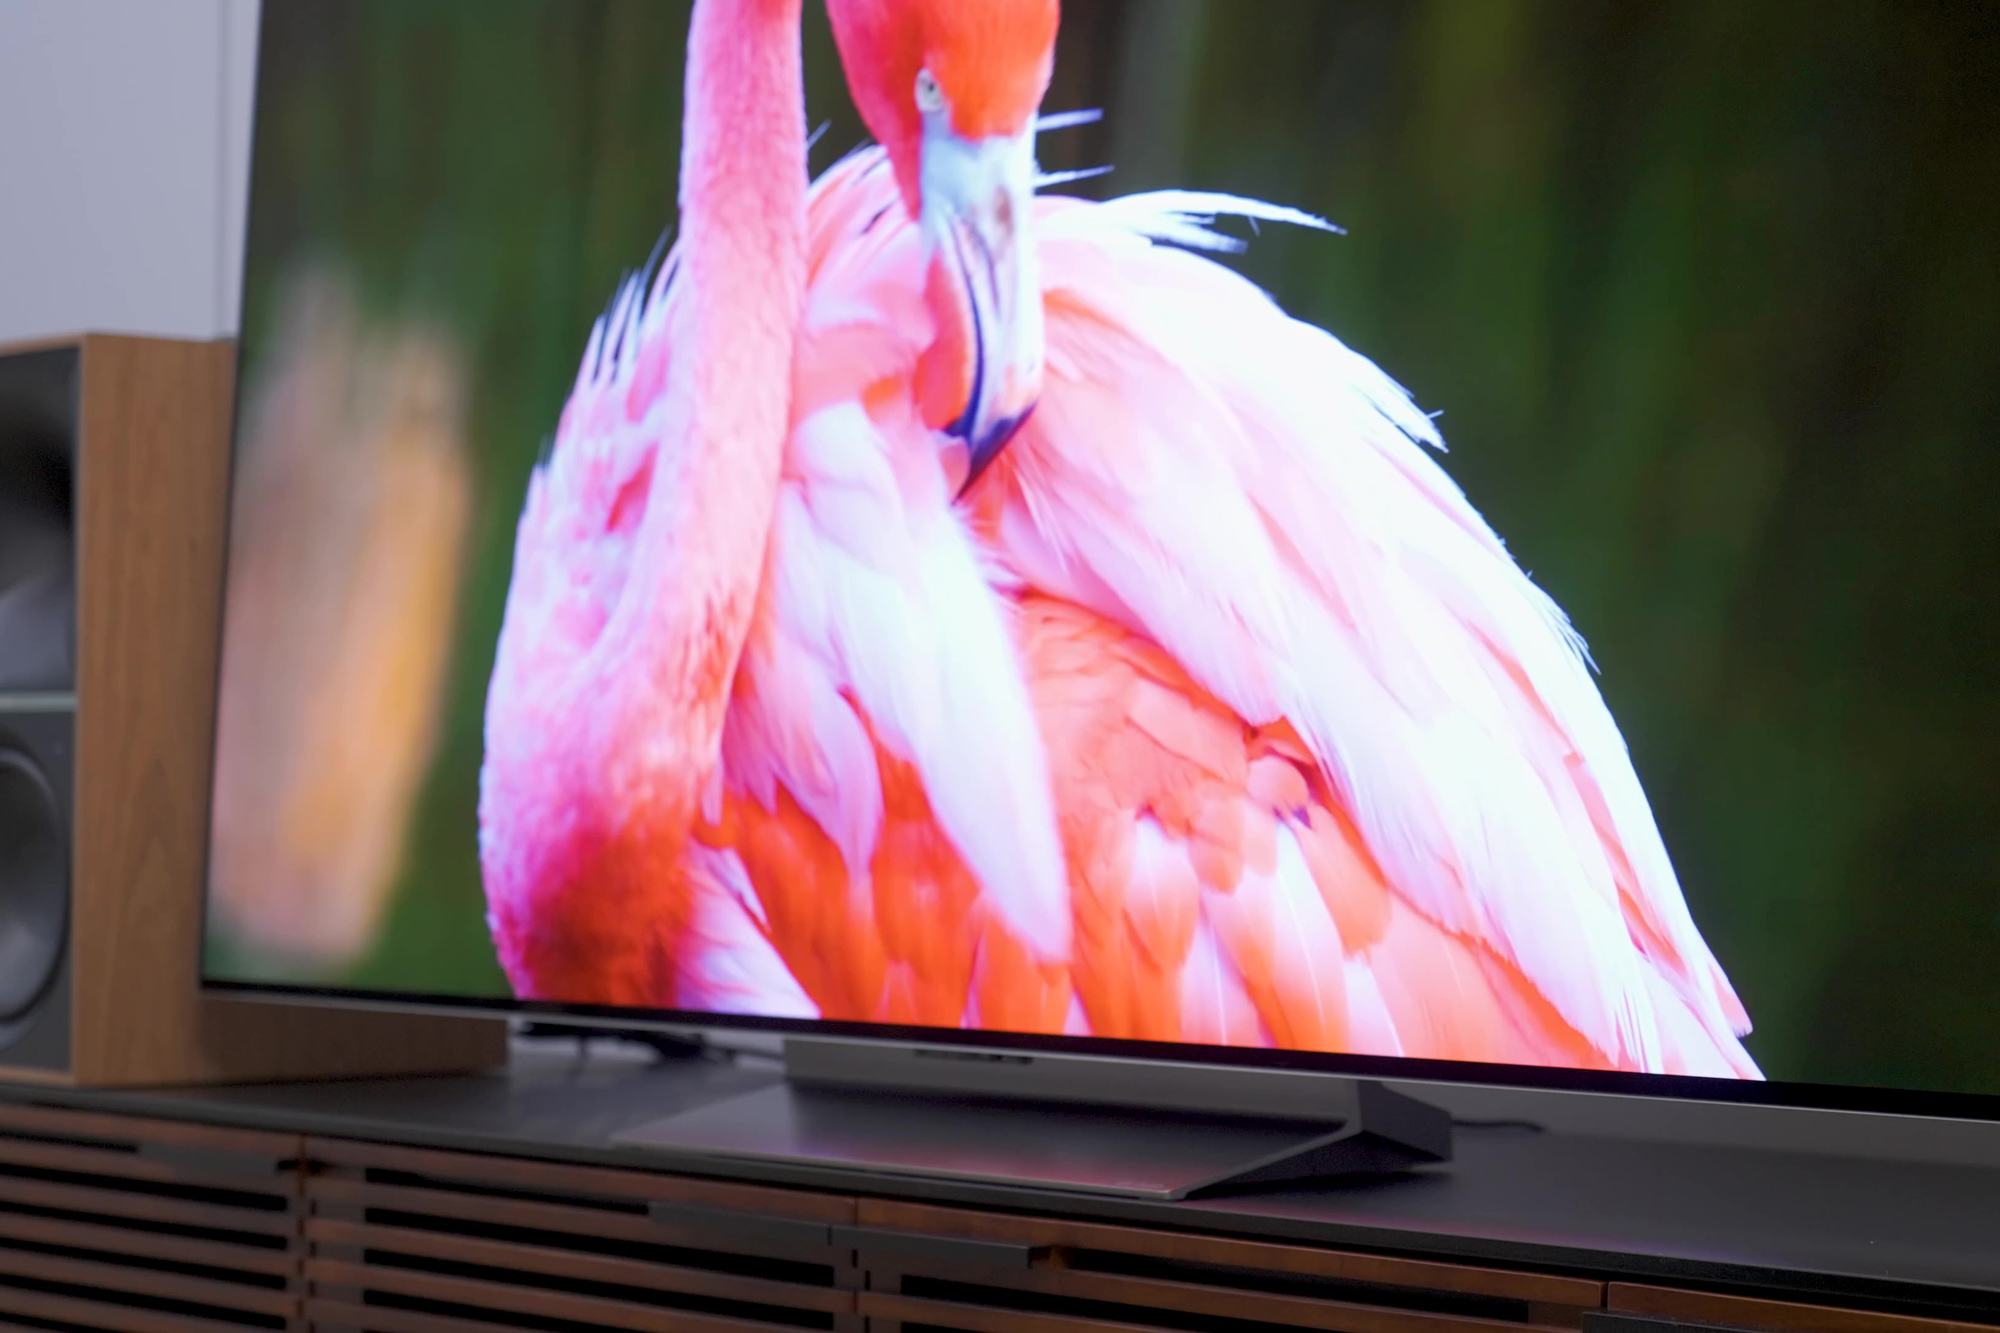 LG G3 OLED TV Looks Brighter Than Ever - Video - CNET